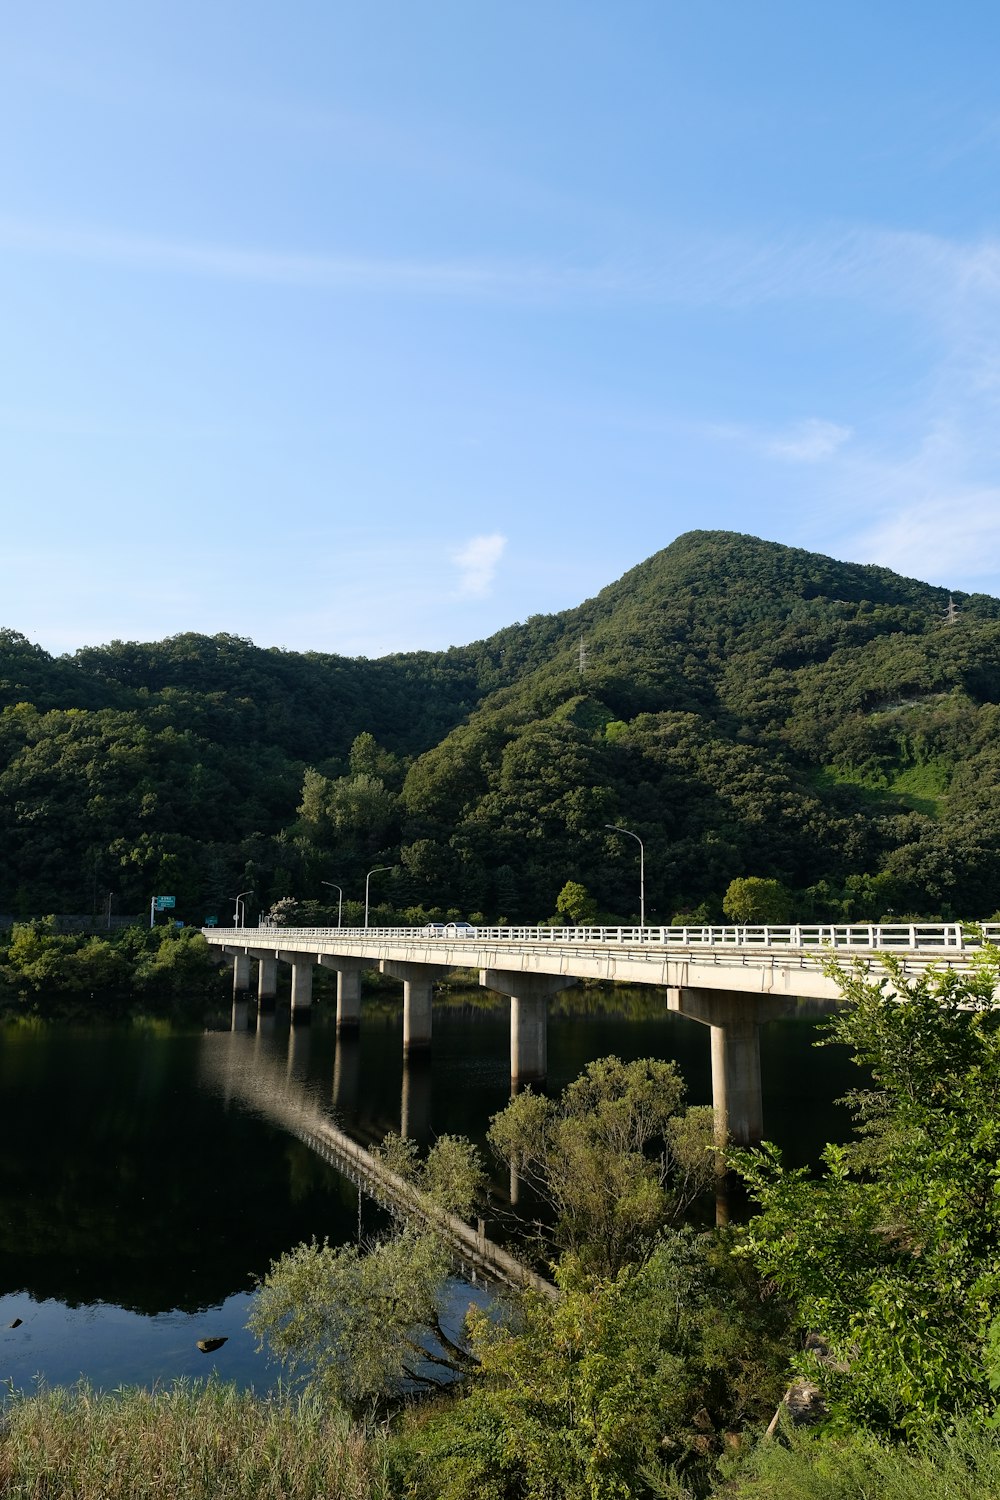 a bridge over a body of water with a mountain in the background